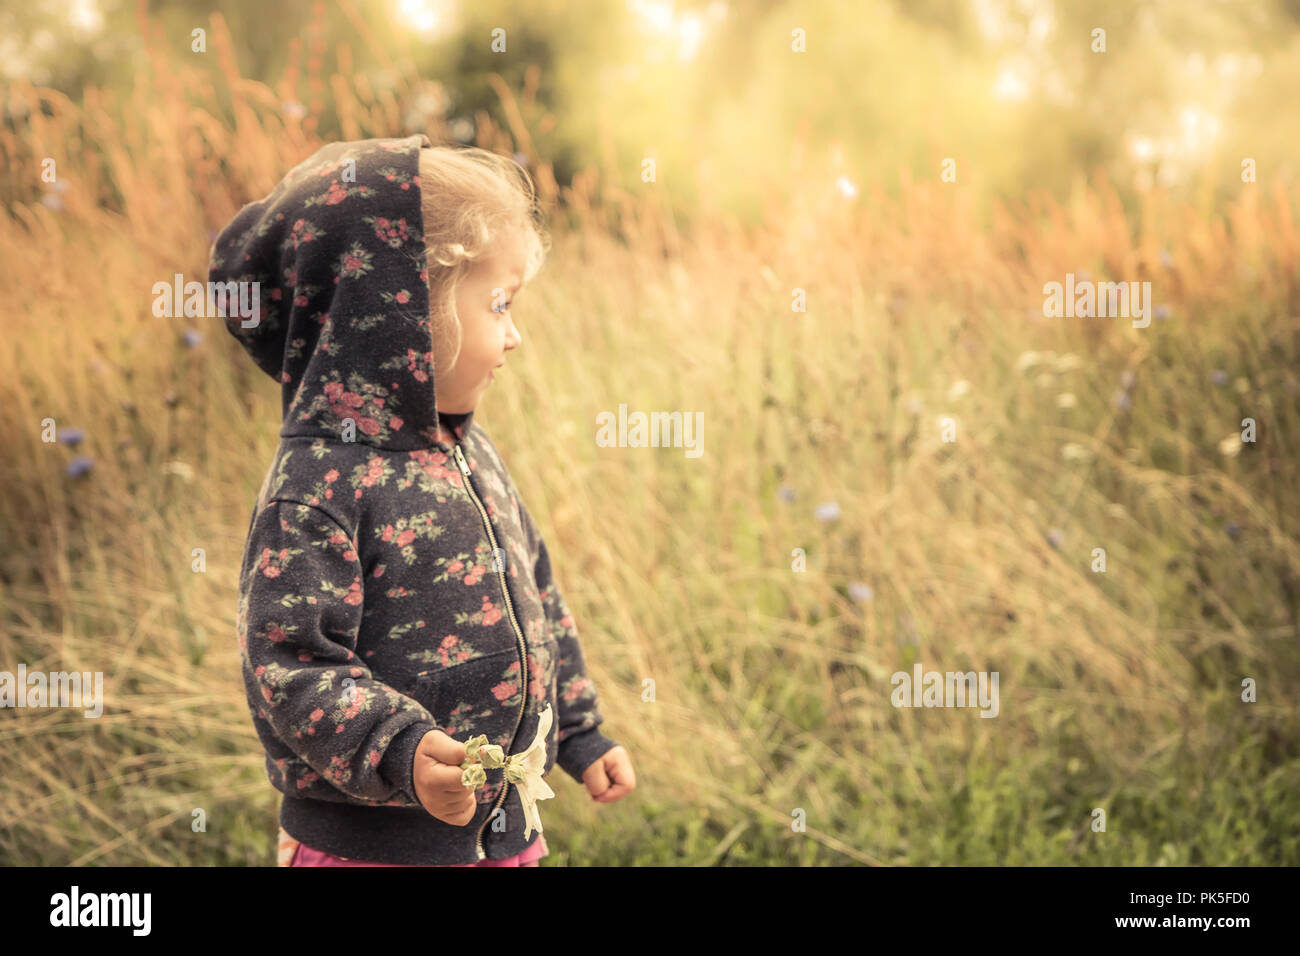 Happy cheerful kid girl smiling autumn golden yellow sunlight landscape concept happy carefree childhood lifestyle Stock Photo